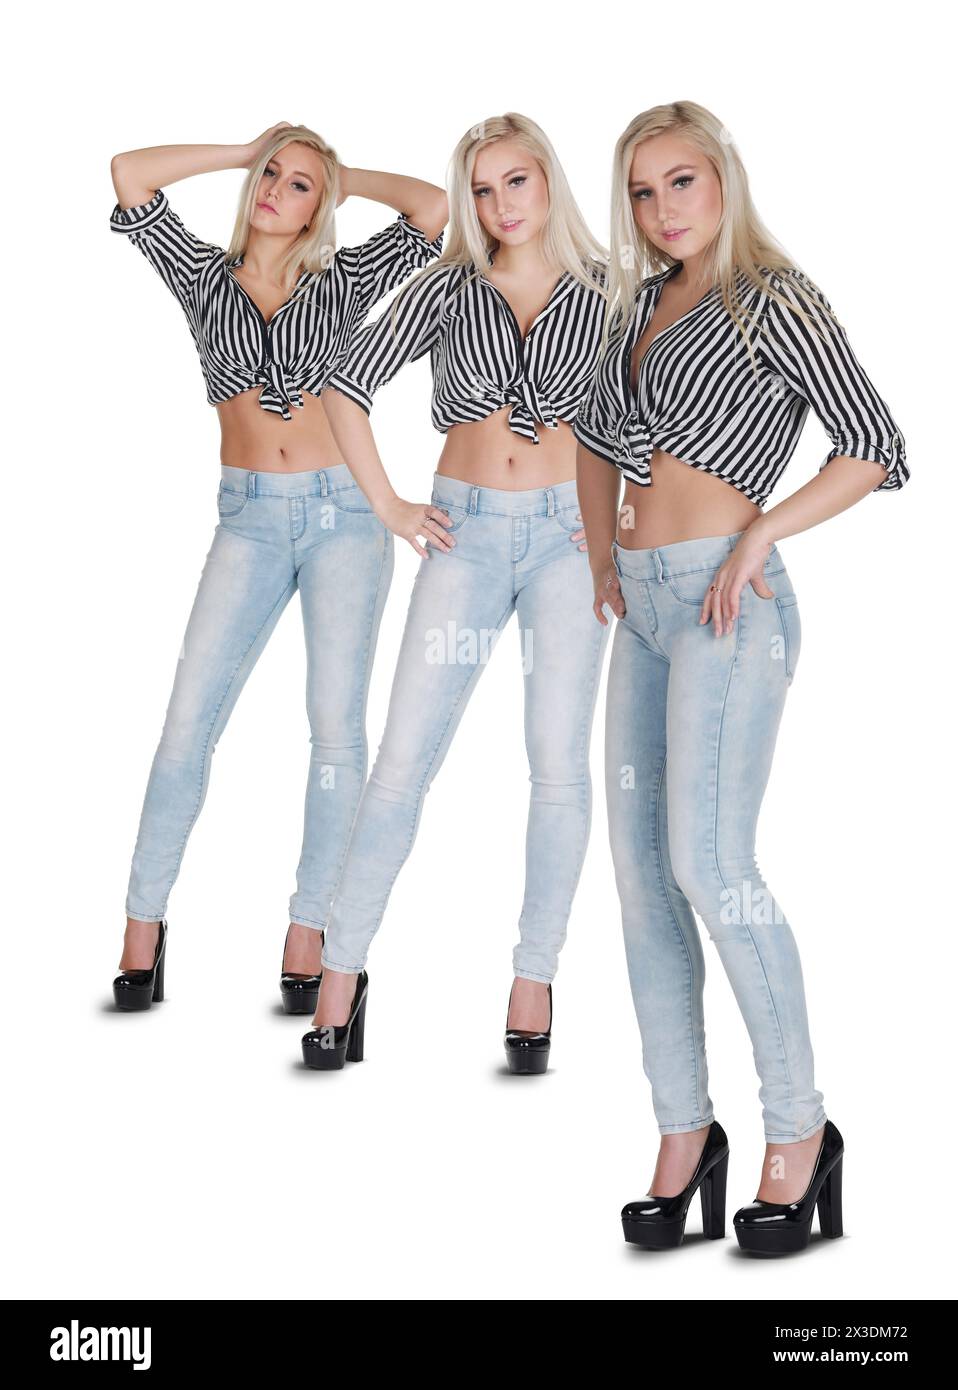 Collage with three young pretty slim blondes (one model) in jeans poses isolated on white background Stock Photo